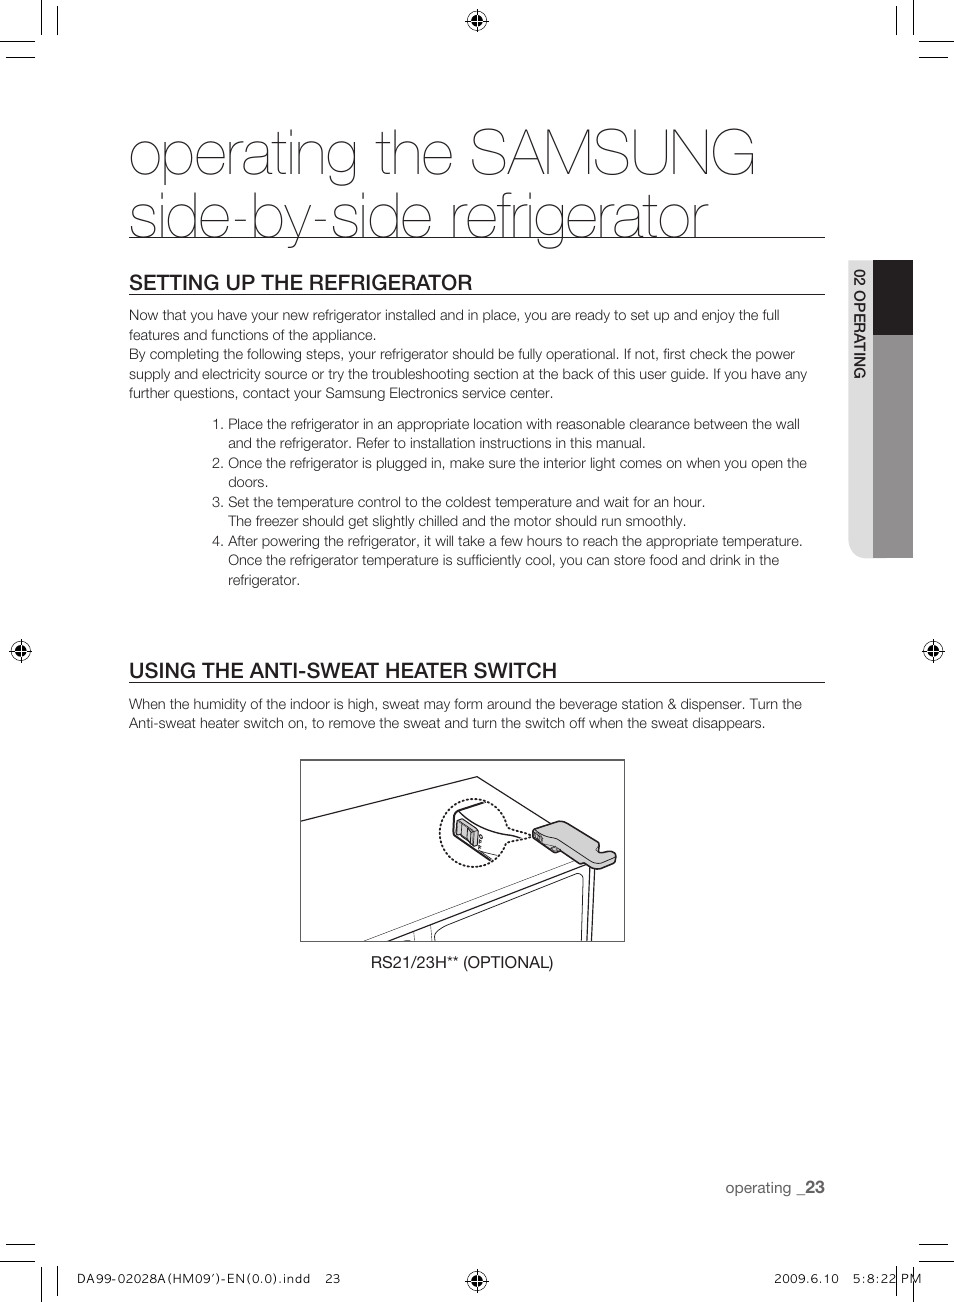 Operating the samsungside-by-side refrigerator, Setting up the  refrigerator, Using the anti-sweat heater switch | Samsung SRS600HNP User  Manual | Page 23 / 44